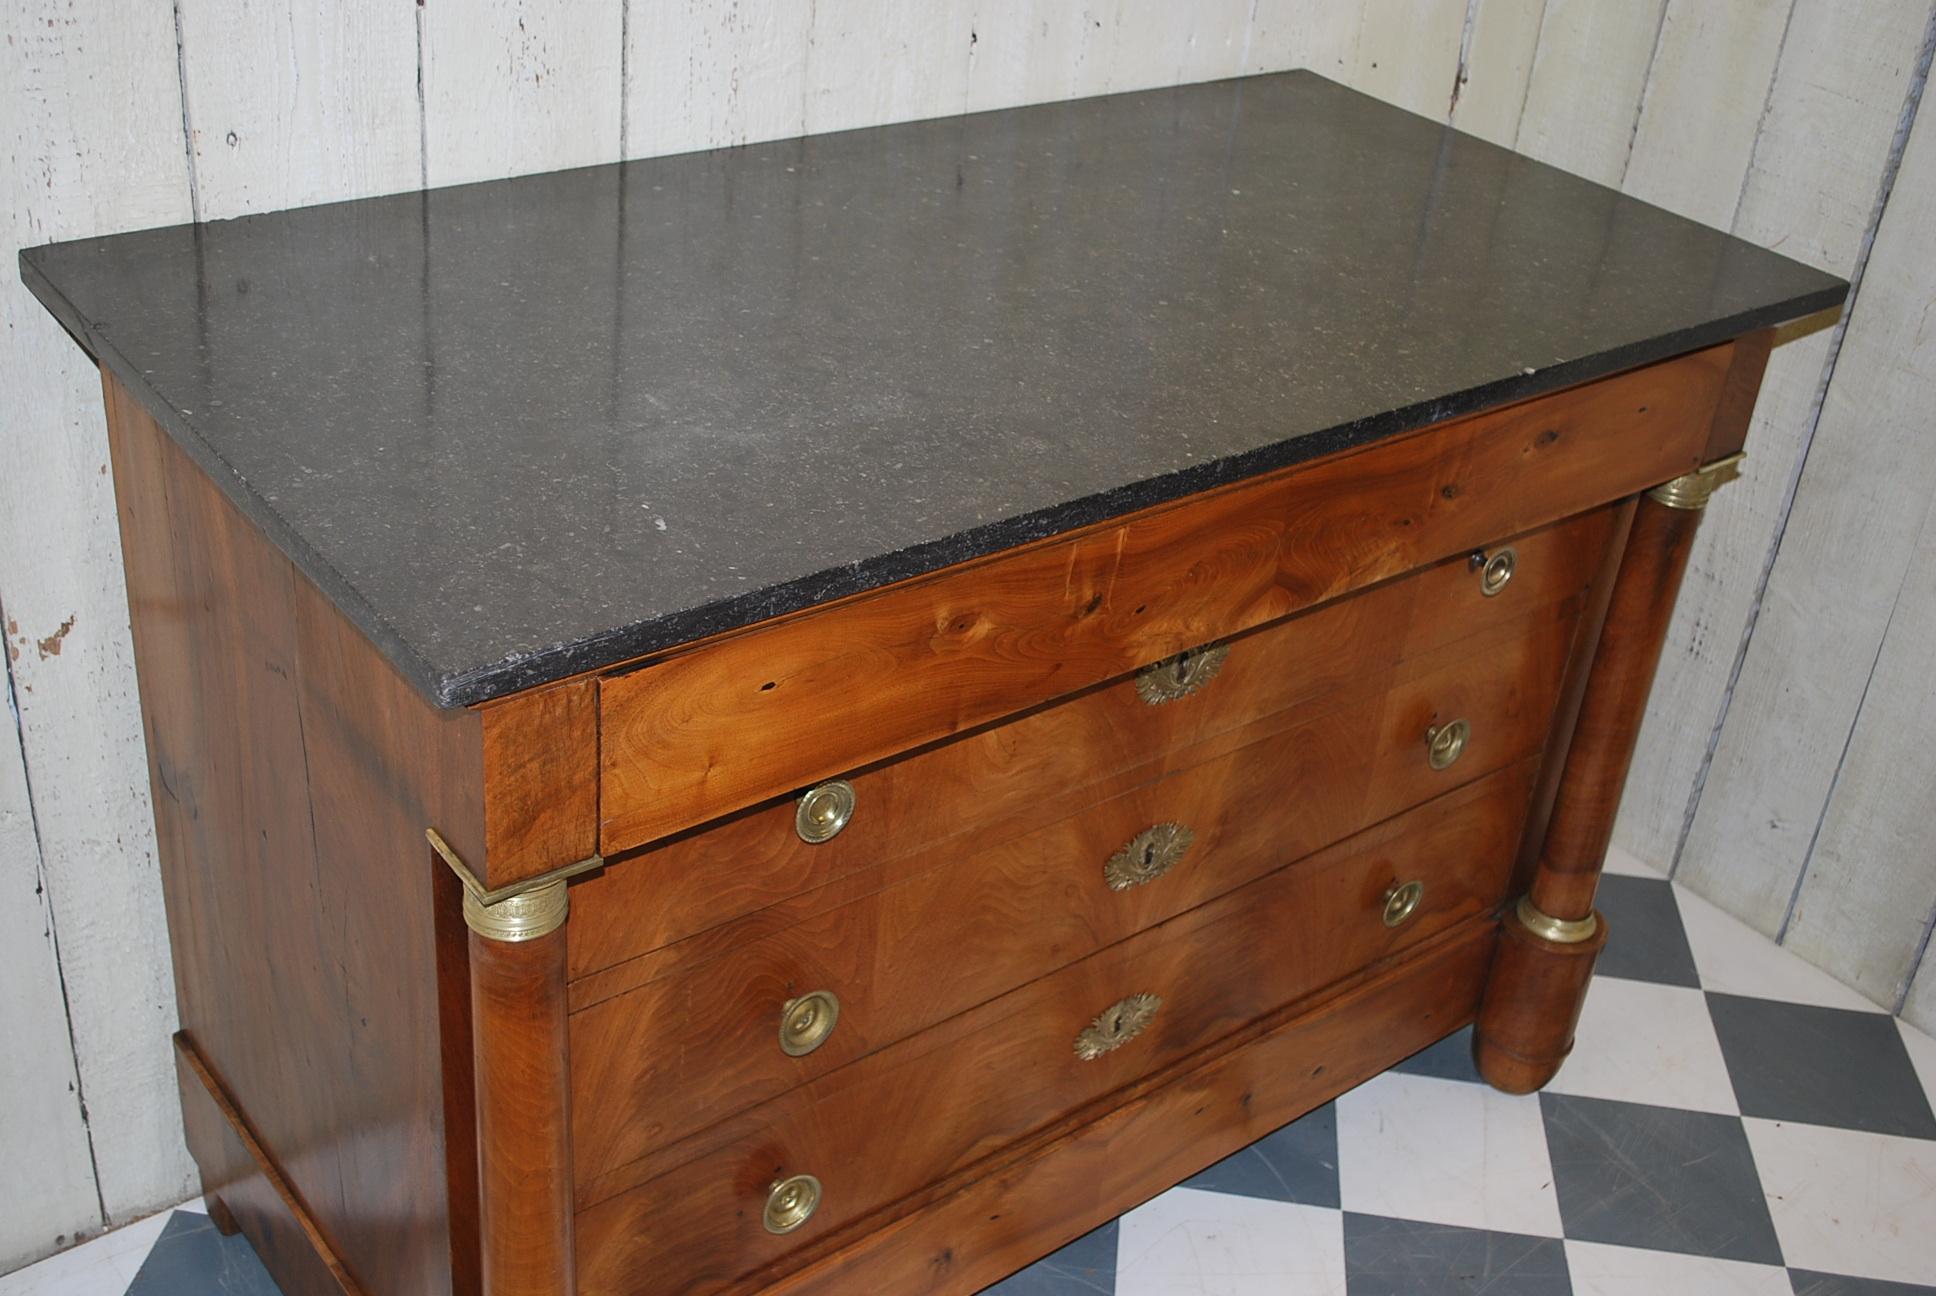 This is a beautifully made French commode or chest of drawers in excellent condition with original black marble top and ormolu mounts. Wonderful flamed walnut veneer to the drawer fronts and column corners. Made on a good solid oak carcass.

 